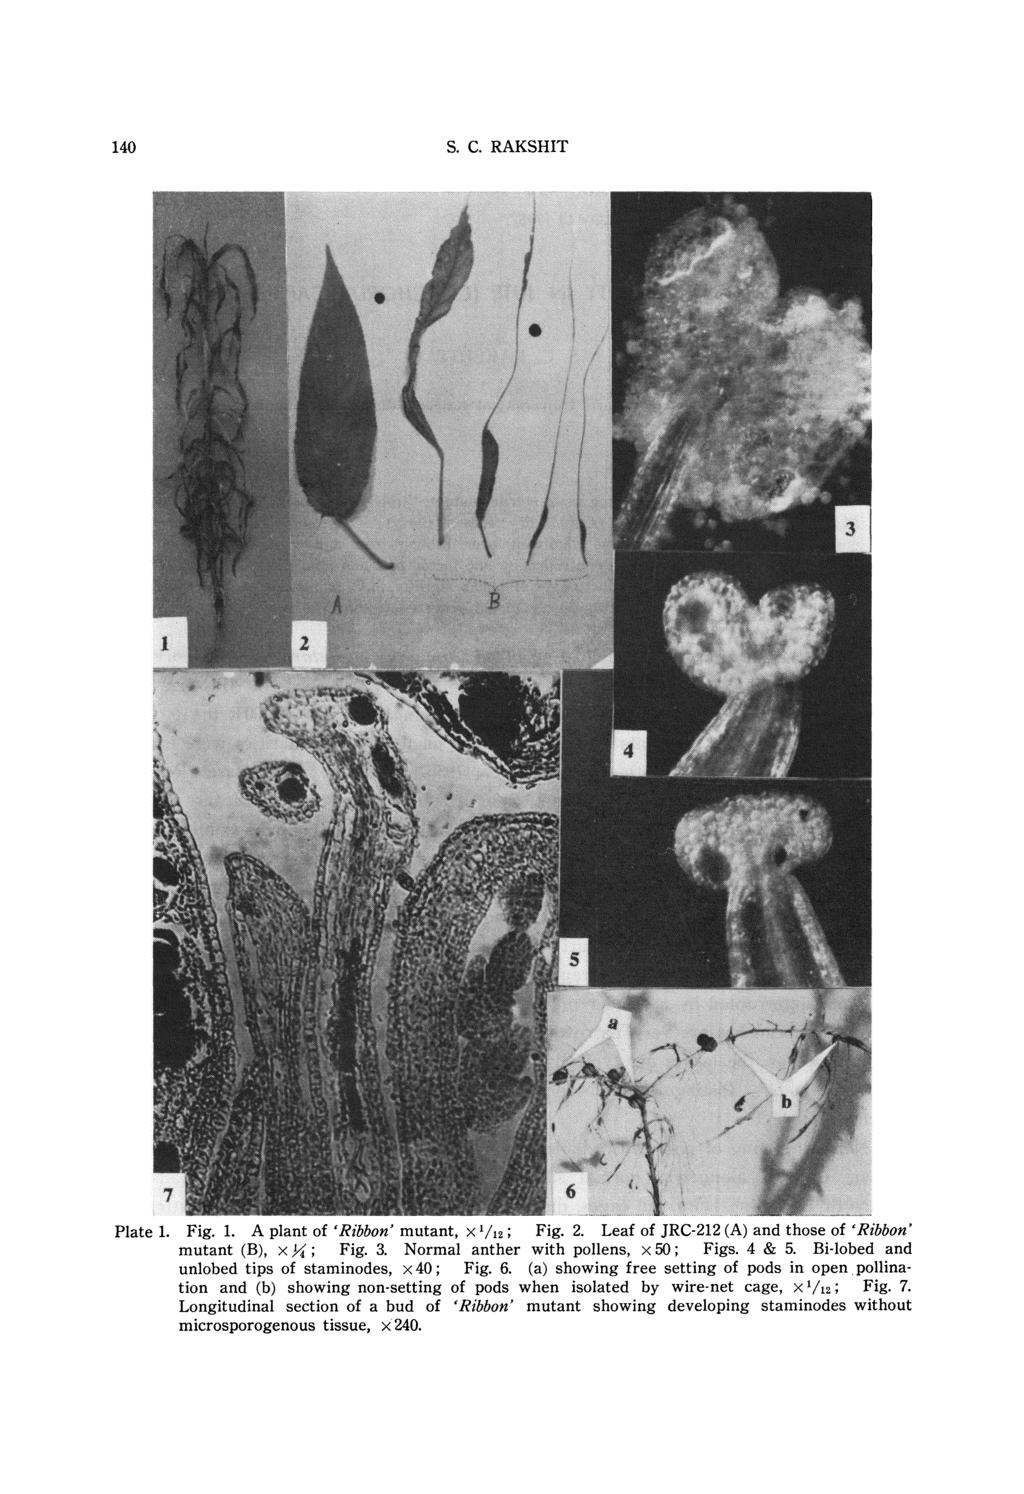 140 Plate S. C. RAKSHIT 1. Fig. 1. A plant of `Ribbon' mutant, x '/12; Fig. 2. Leaf of JRC-212 (A) and those of `Ribbon' mutant (B), x )4 ; Fig. 3. Normal anther with pollens, x 50; Figs. 4 & 5.